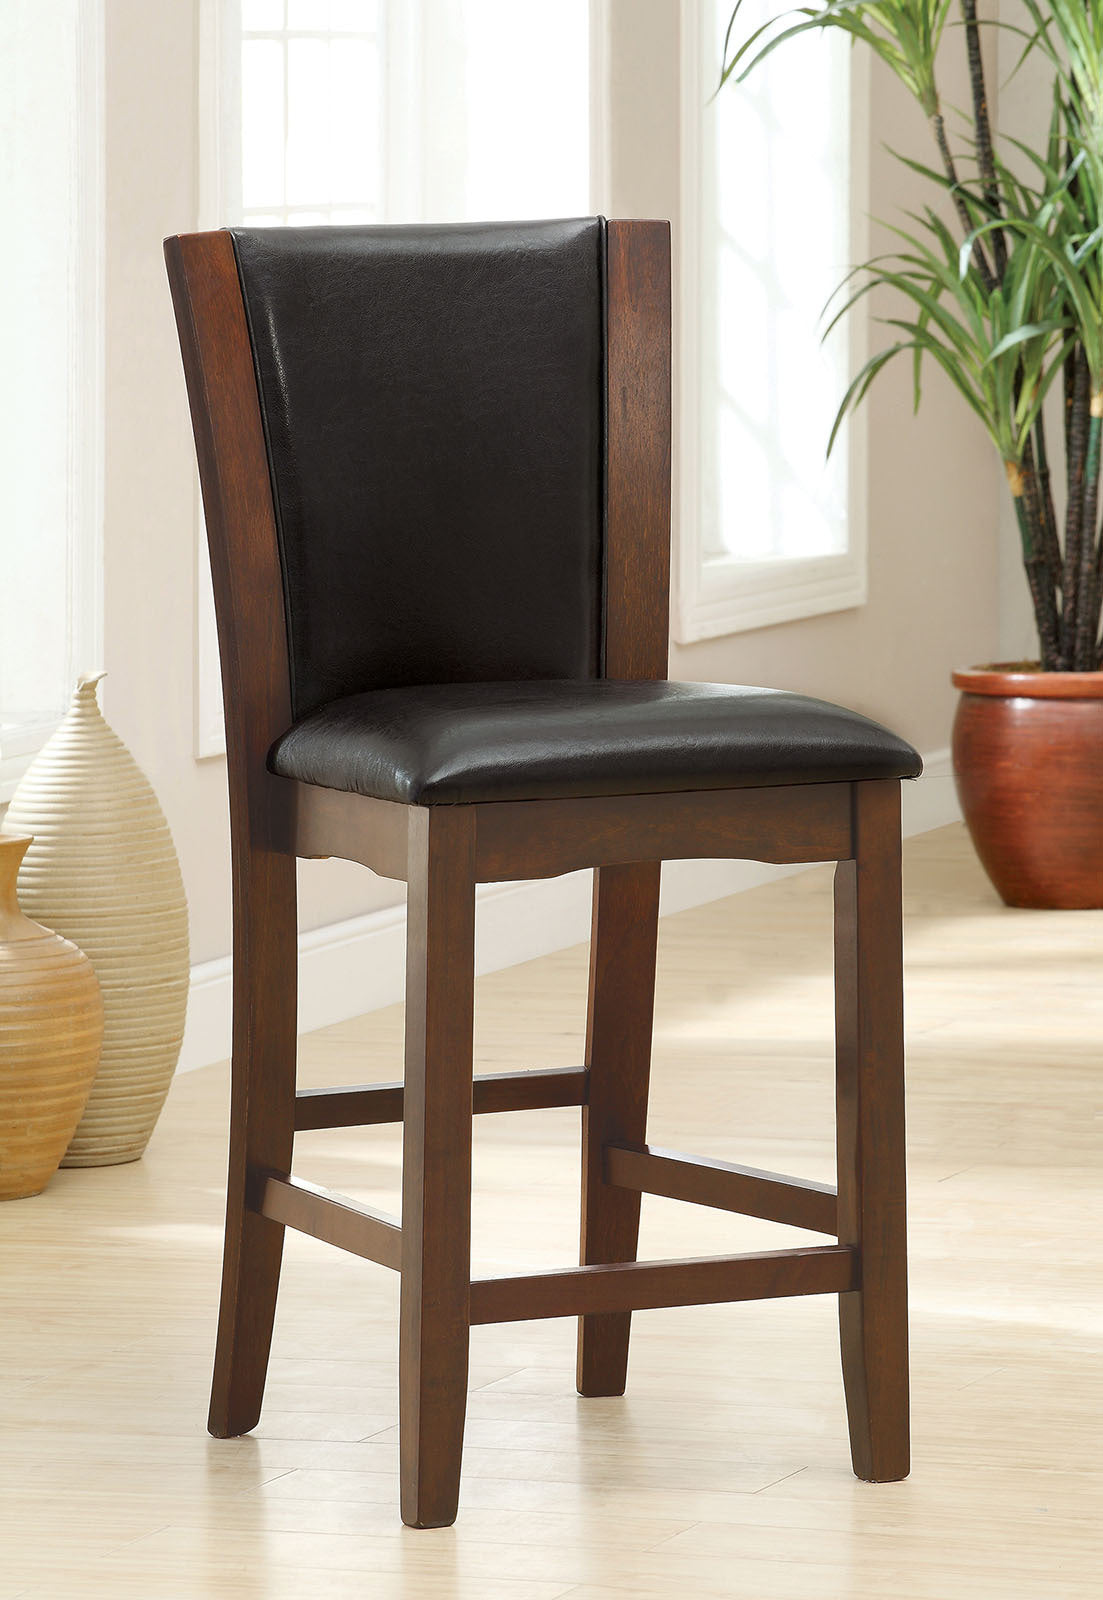 Style Comfort Contemporary 2pcs Counter Height Chairs brown-brown-dining